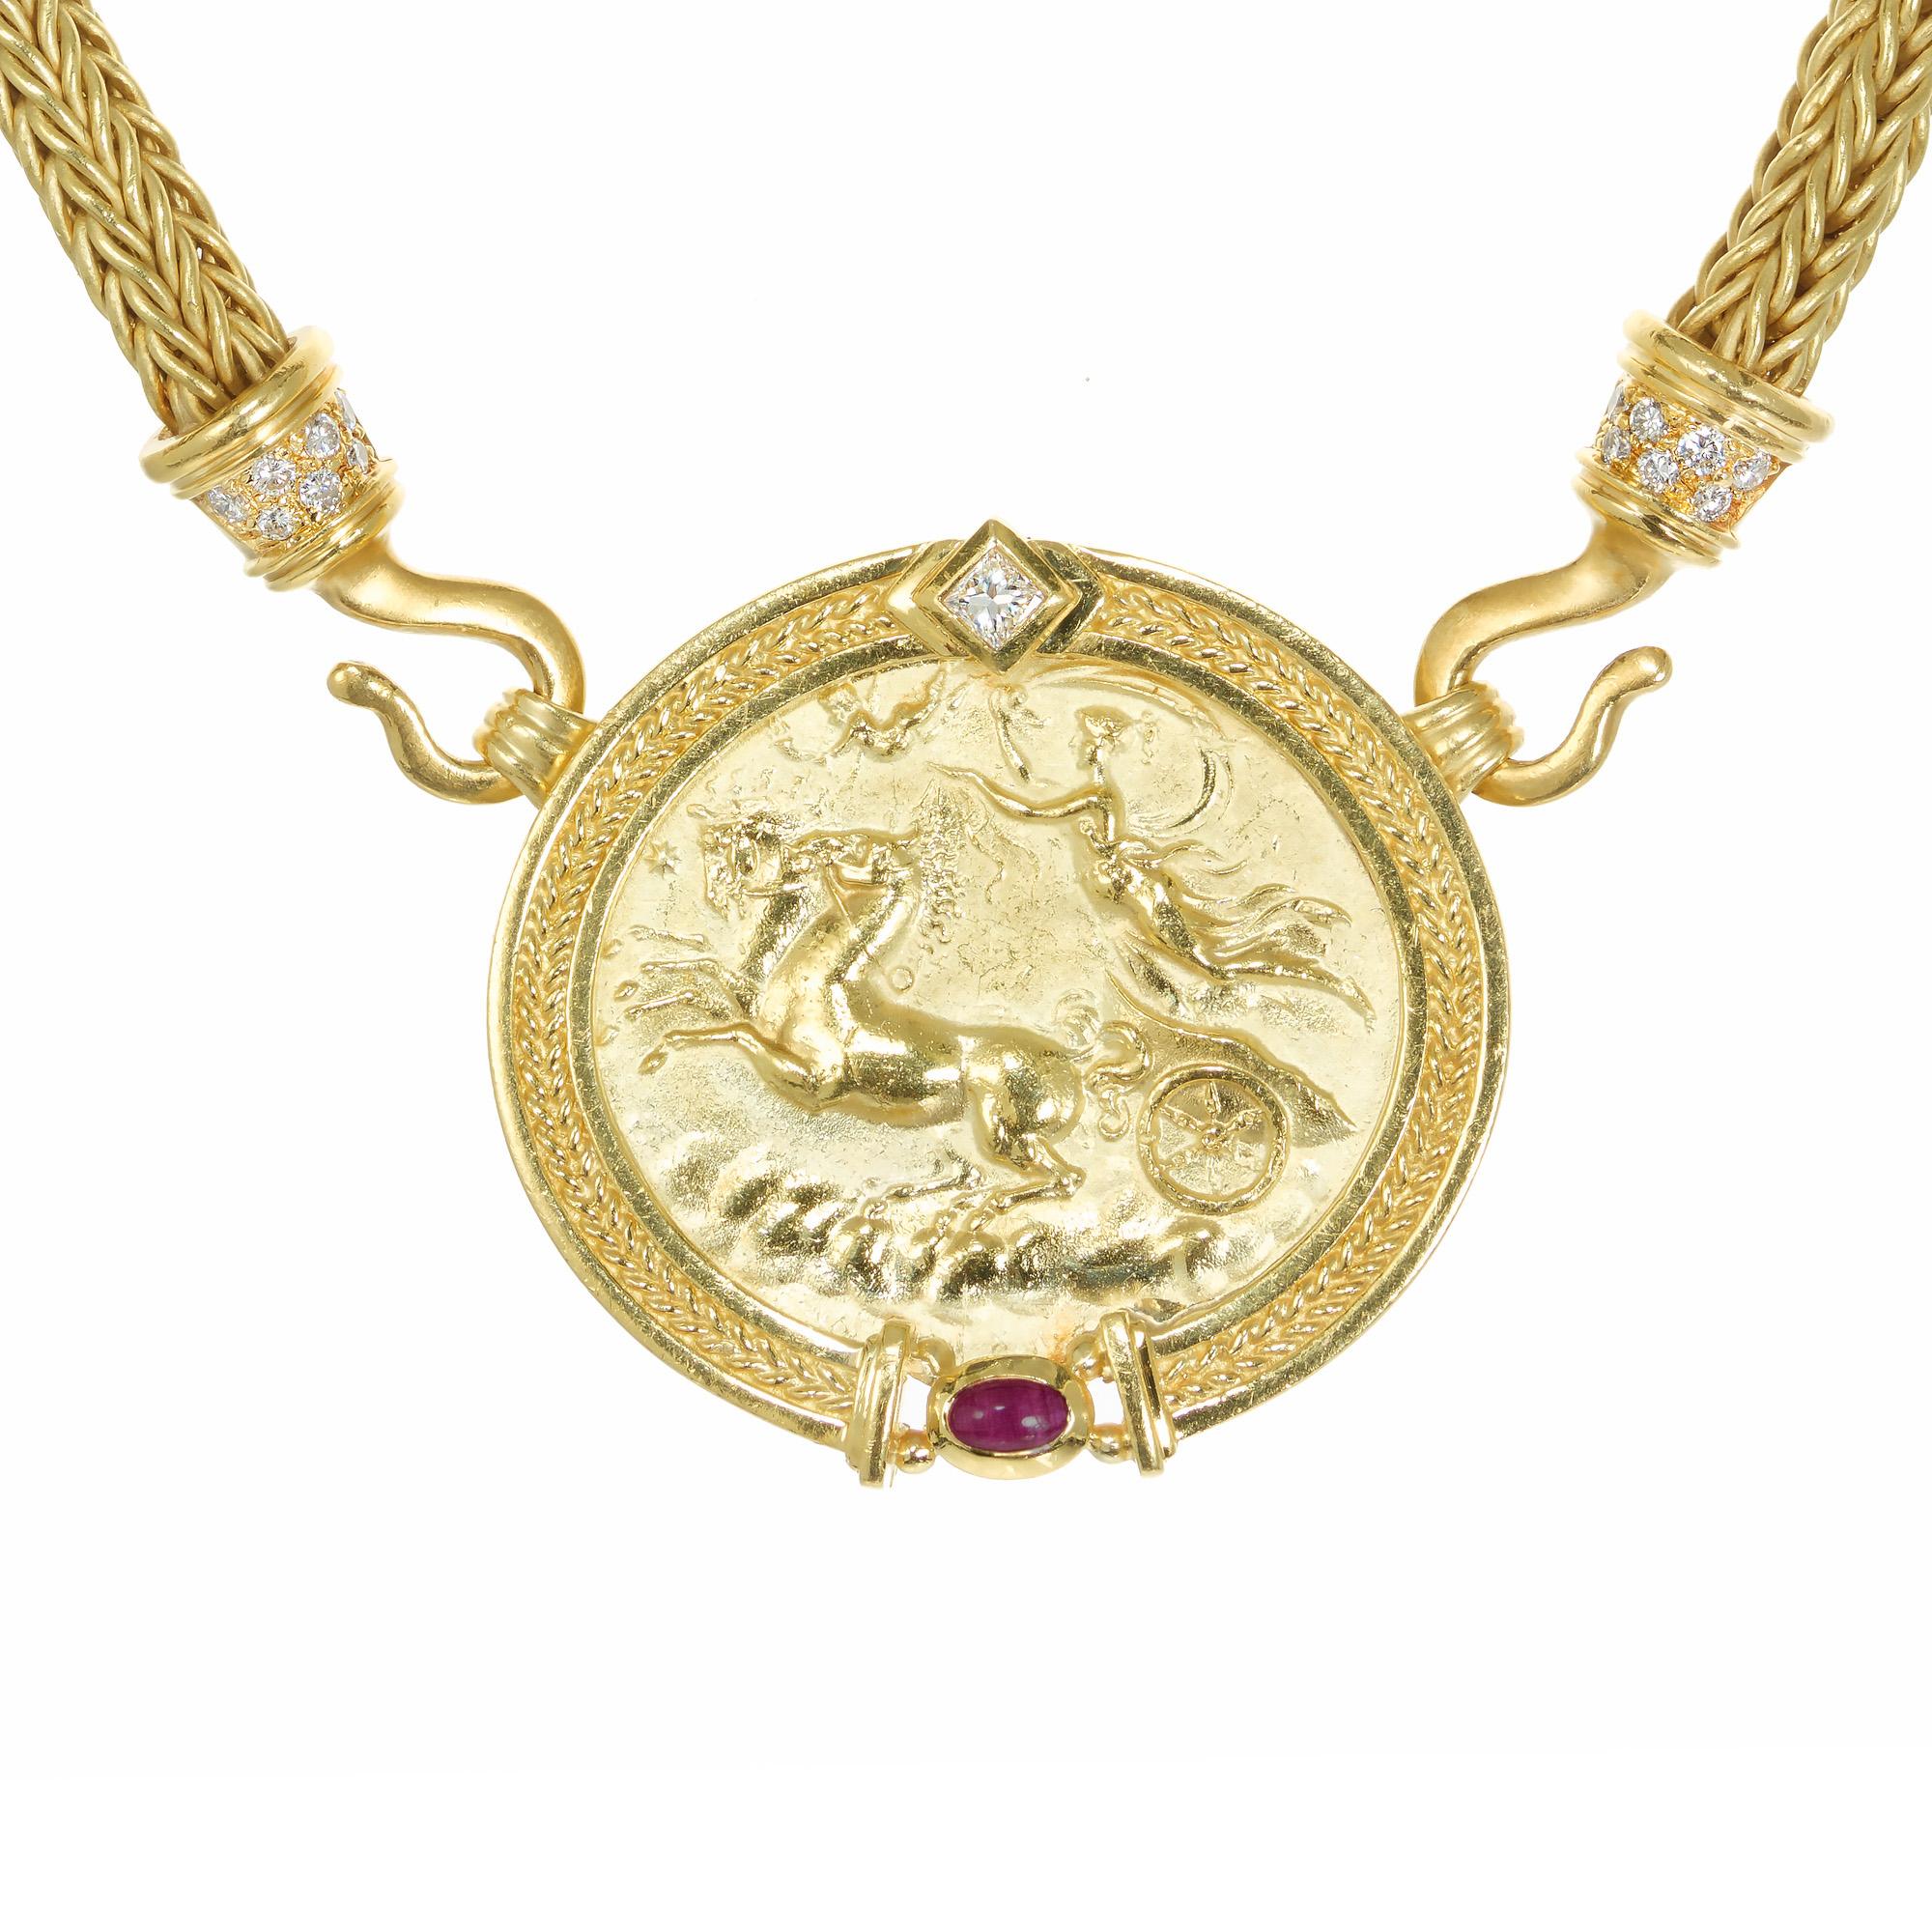 Vintage Byzantine style Seidengang heavy textured 18k gold necklace and pin and pendant necklace. This round pendant has a horse and chariot, accented with a princess cut diamond on top and a cabochon oval ruby on the bottom. A 16 inch woven chain